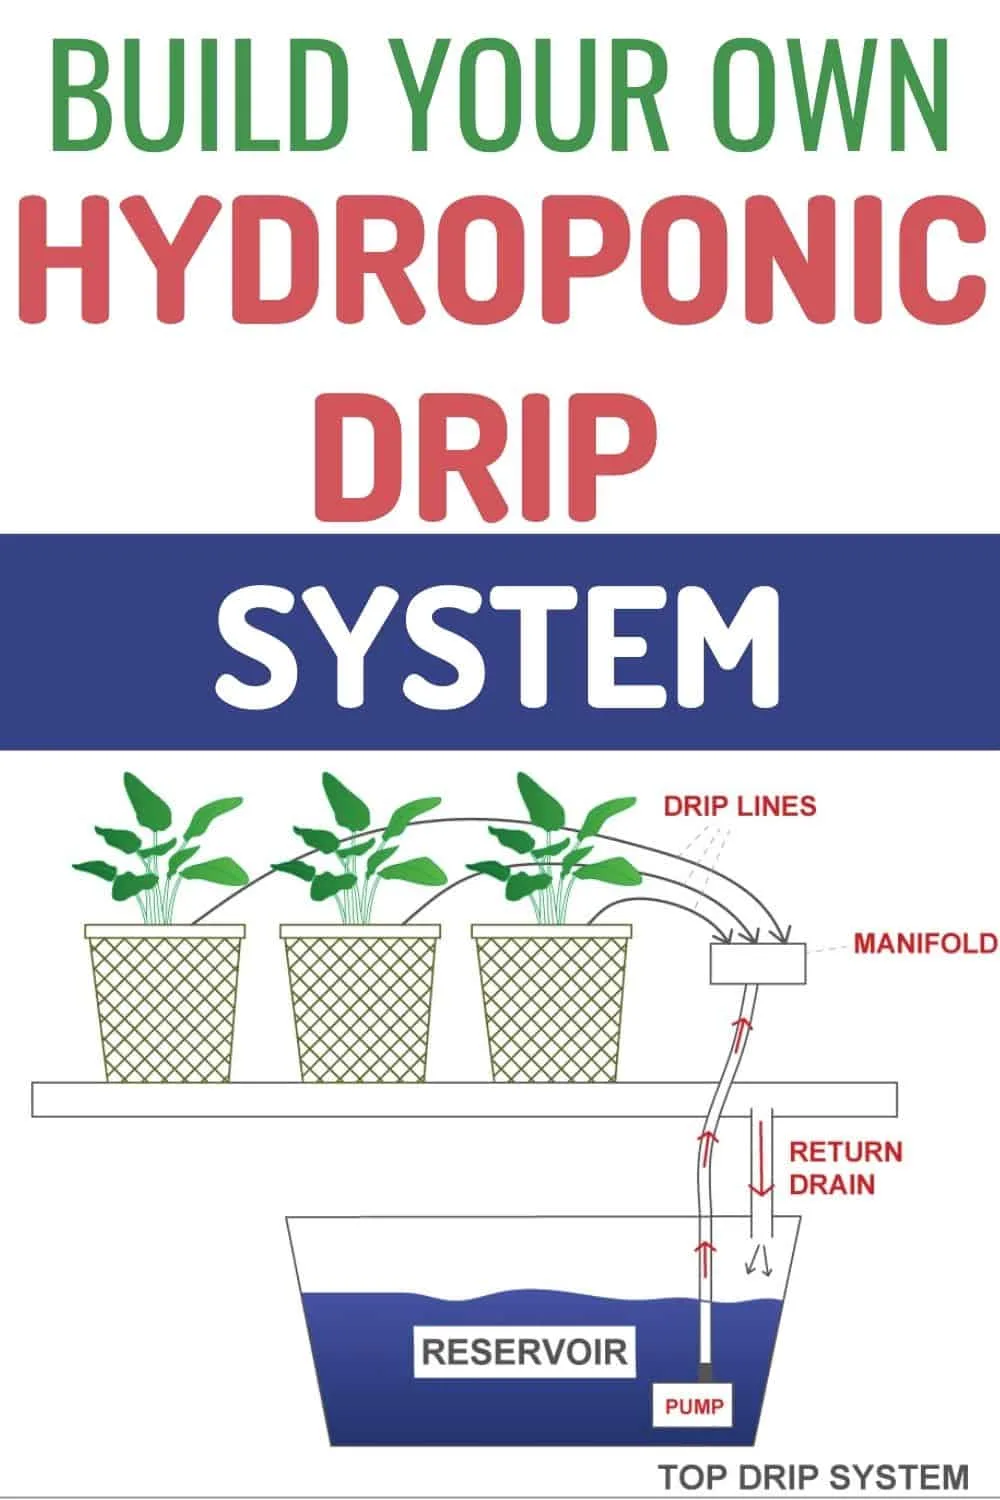 Build your own hydroponic drip system